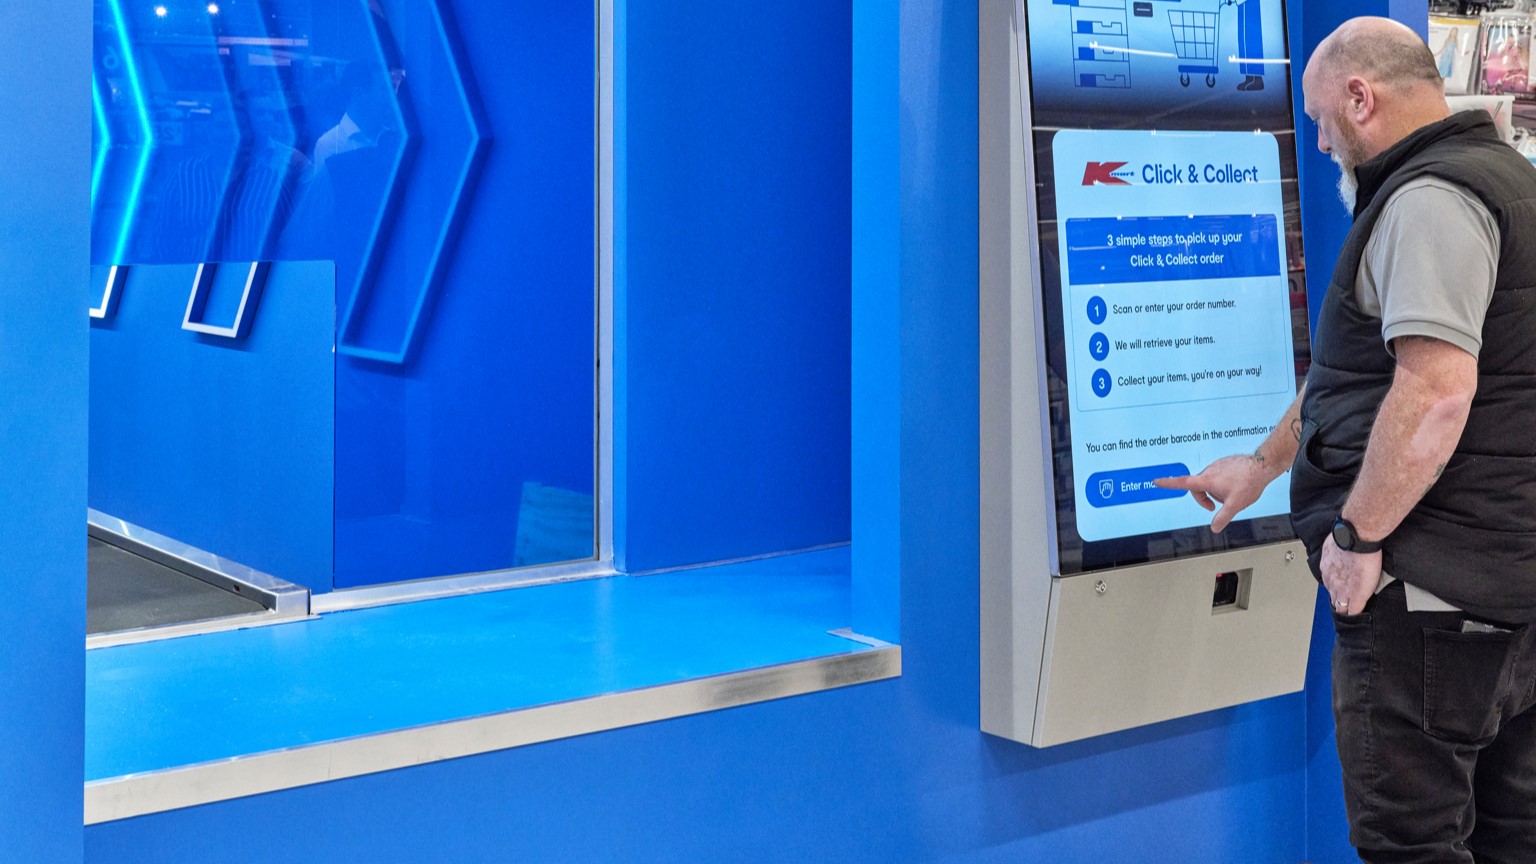 Kmart Australia trials 'click and collect' kiosk in store